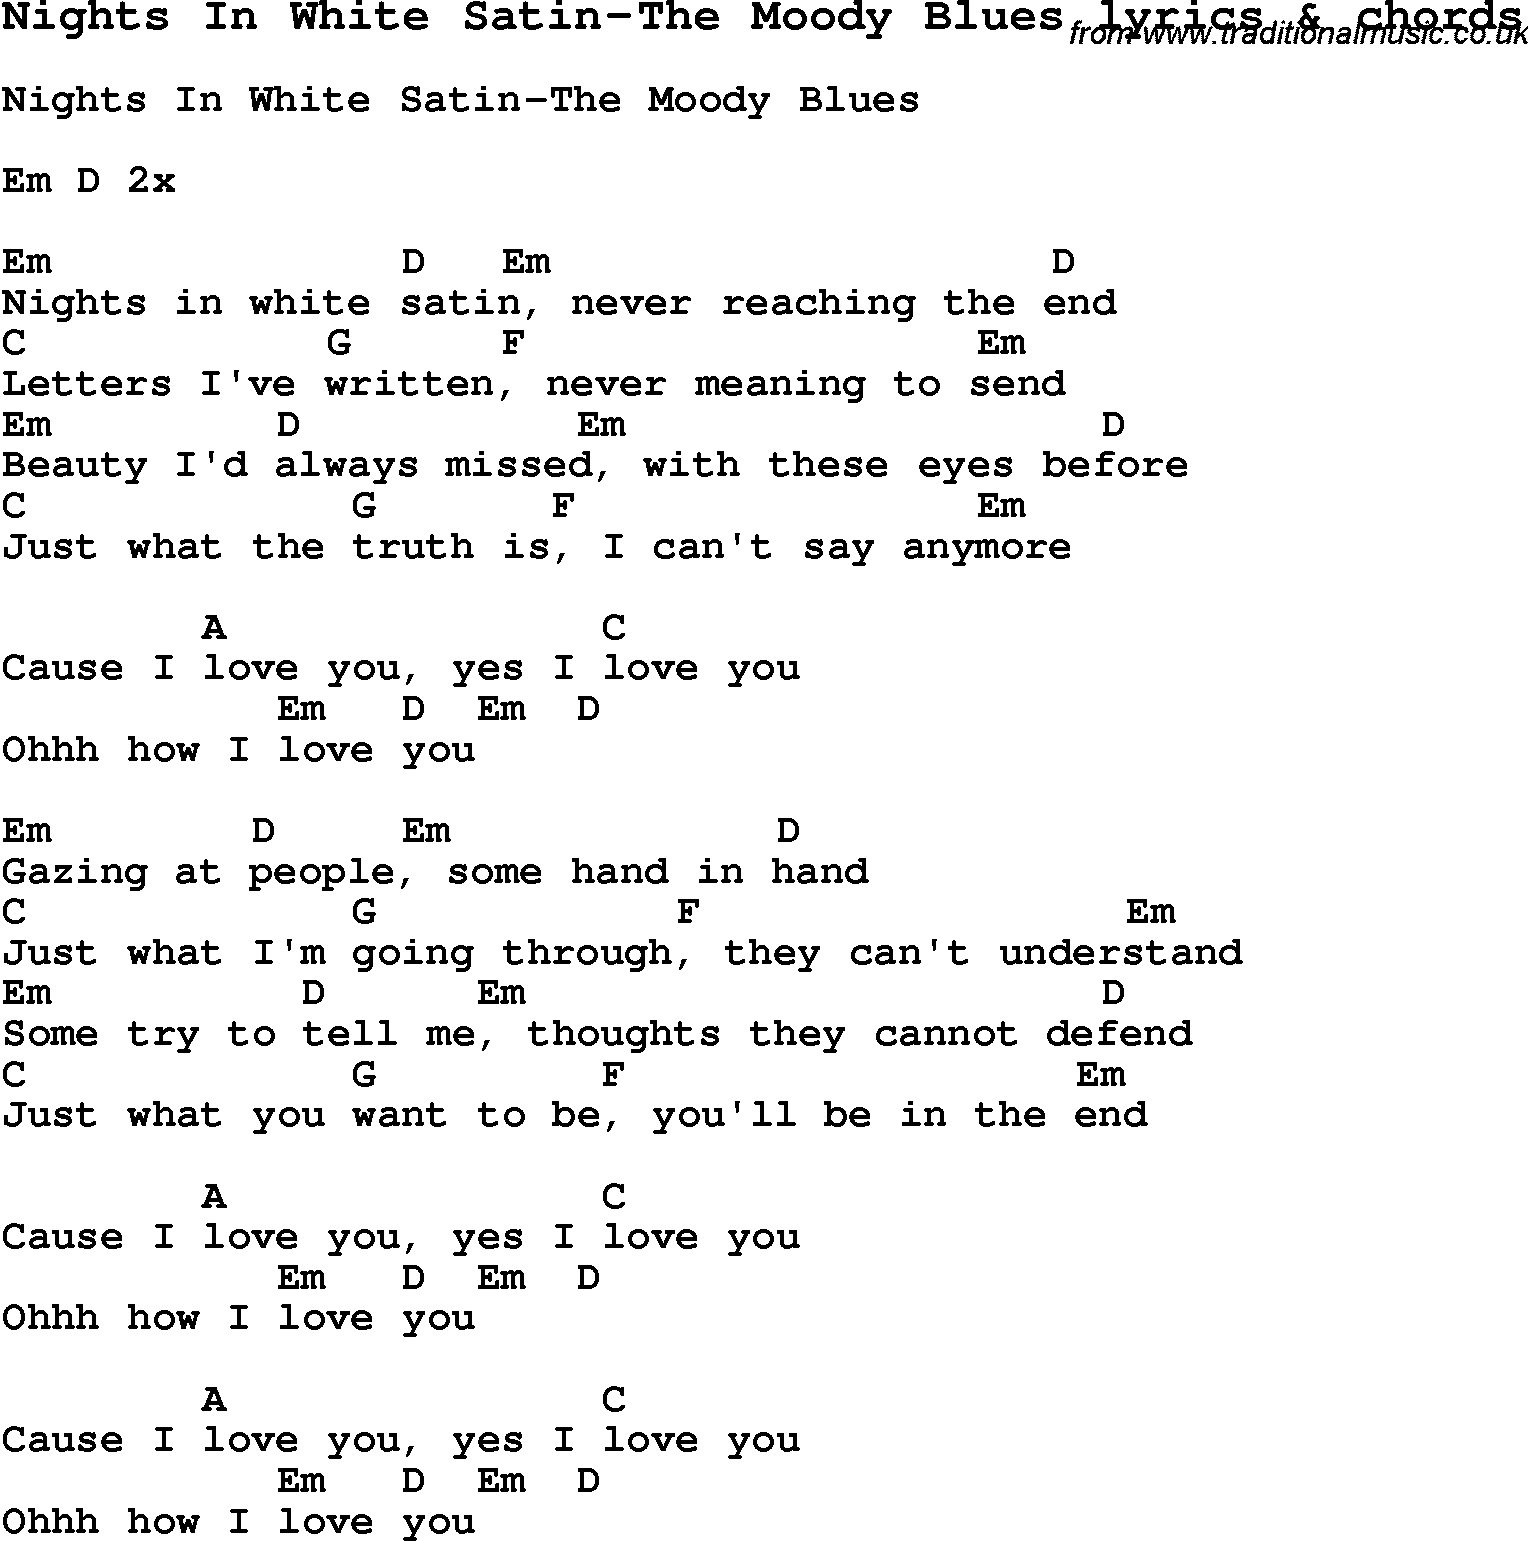 Love Song Lyrics for: Nights In White Satin-The Moody Blues with chords for Ukulele, Guitar Banjo etc.